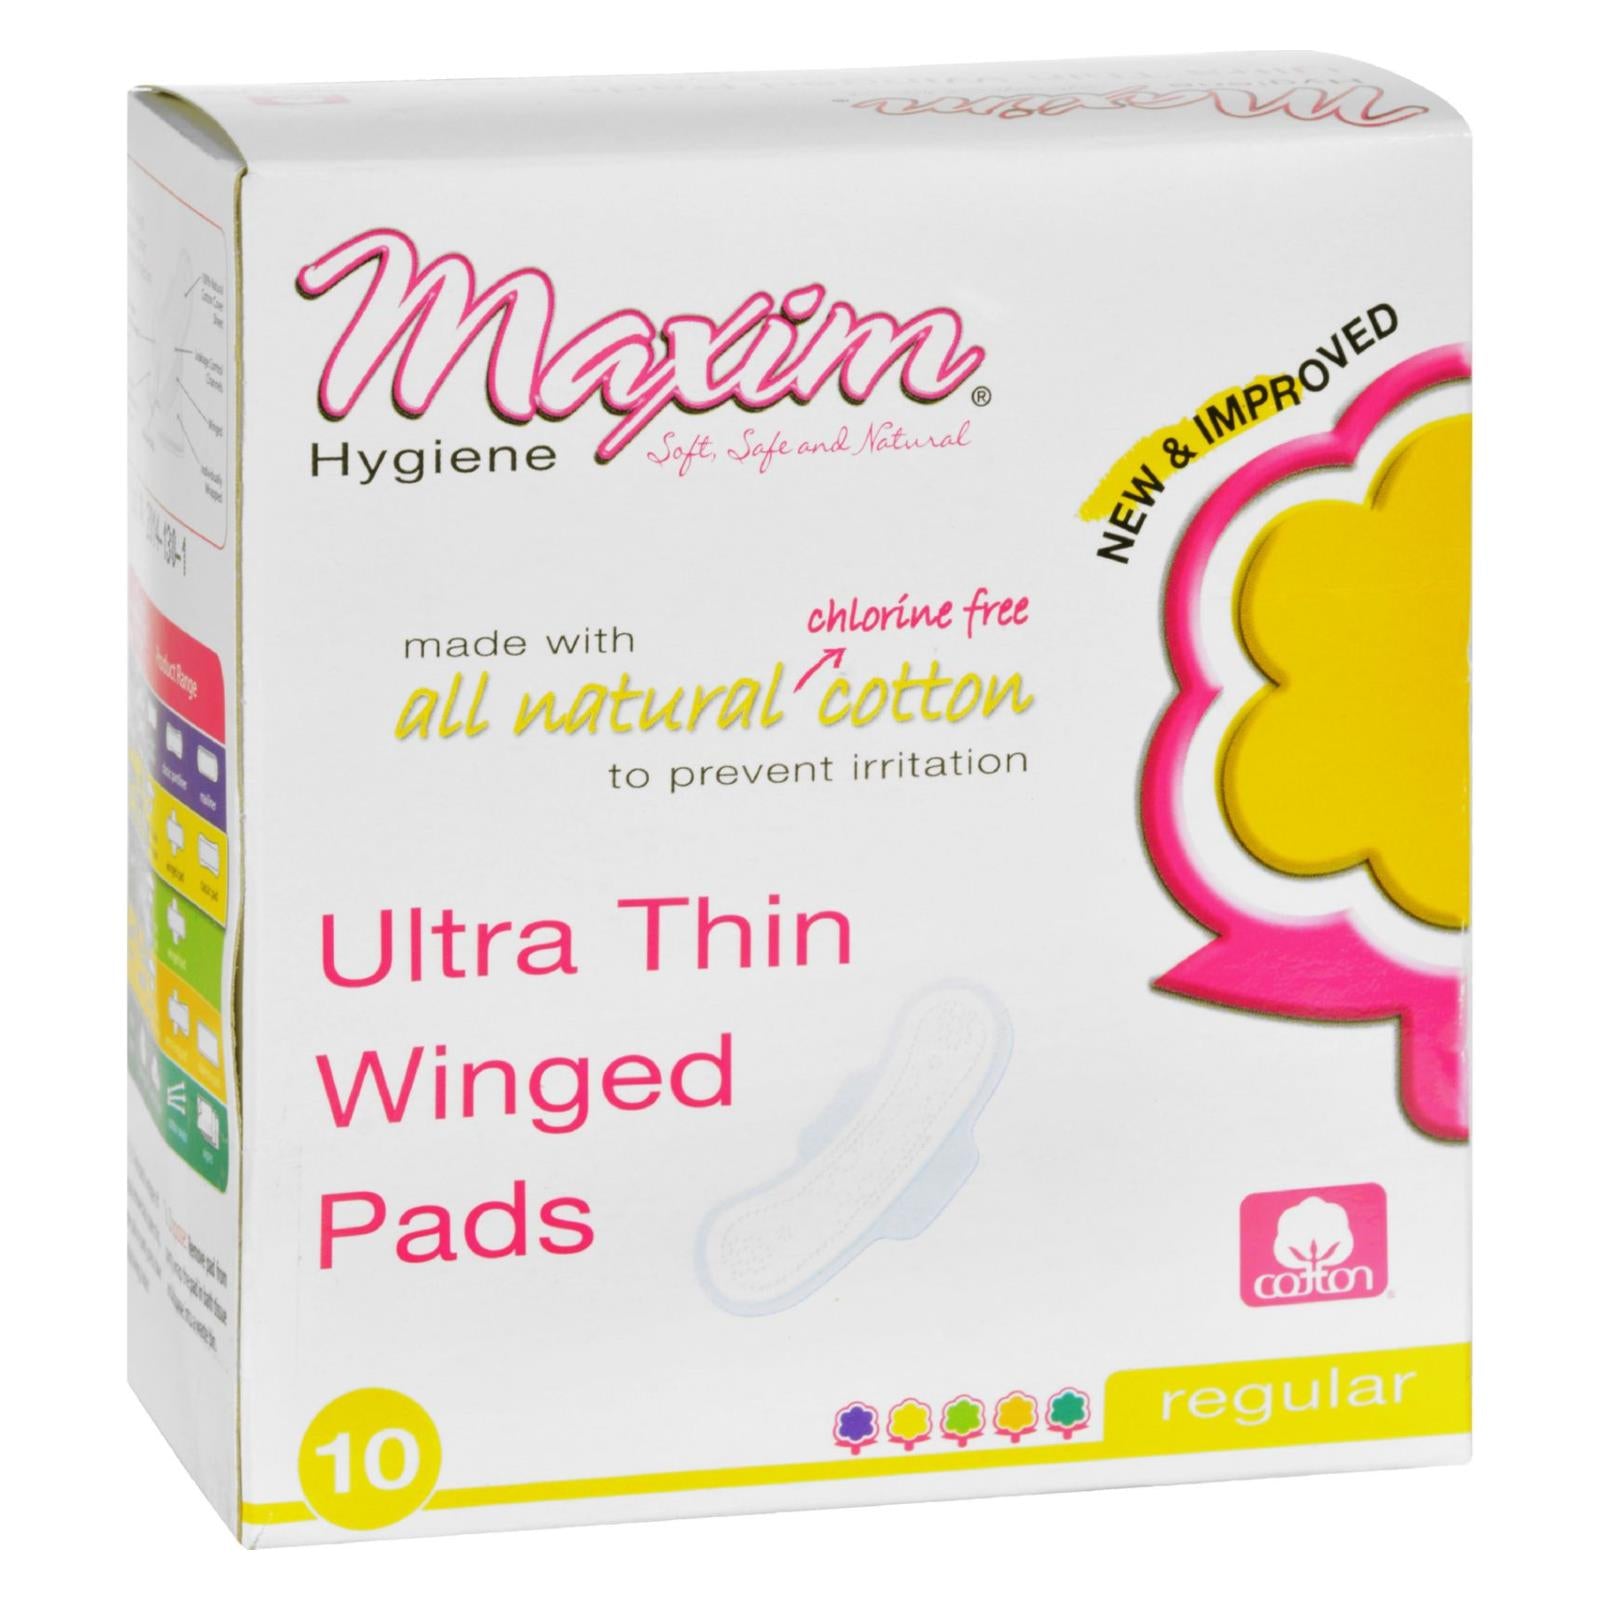 Maxim Hygiene Products, Maxim Hygiene Natural Cotton Ultra Thin Winged Pads Daytime - 10 serviettes hygiéniques